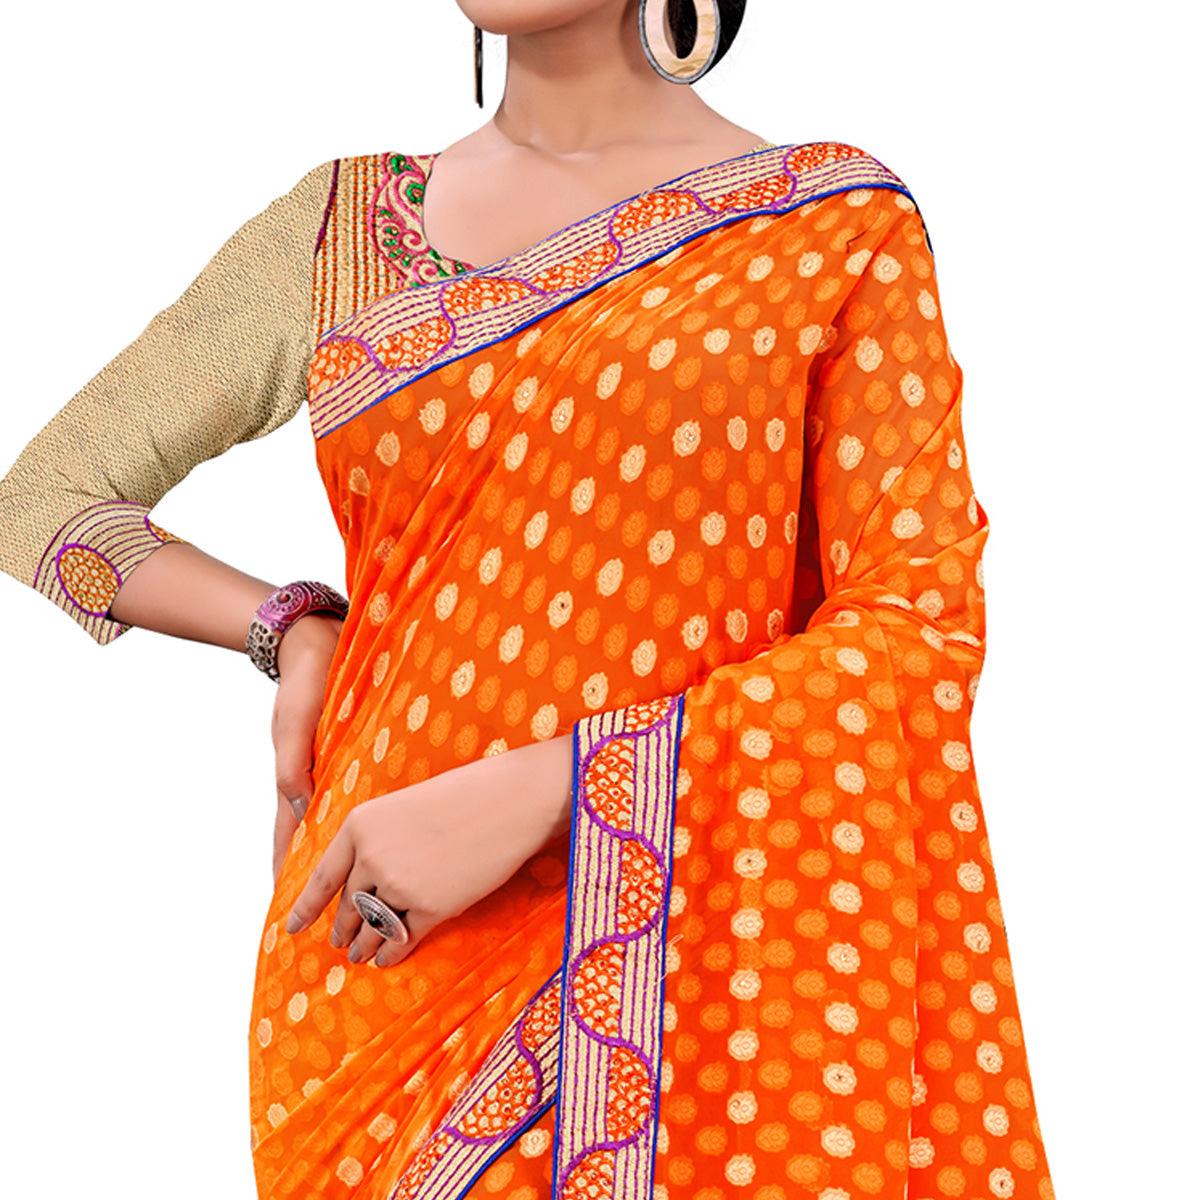 Blooming Orange Colored Party Wear Georgette Saree - Peachmode